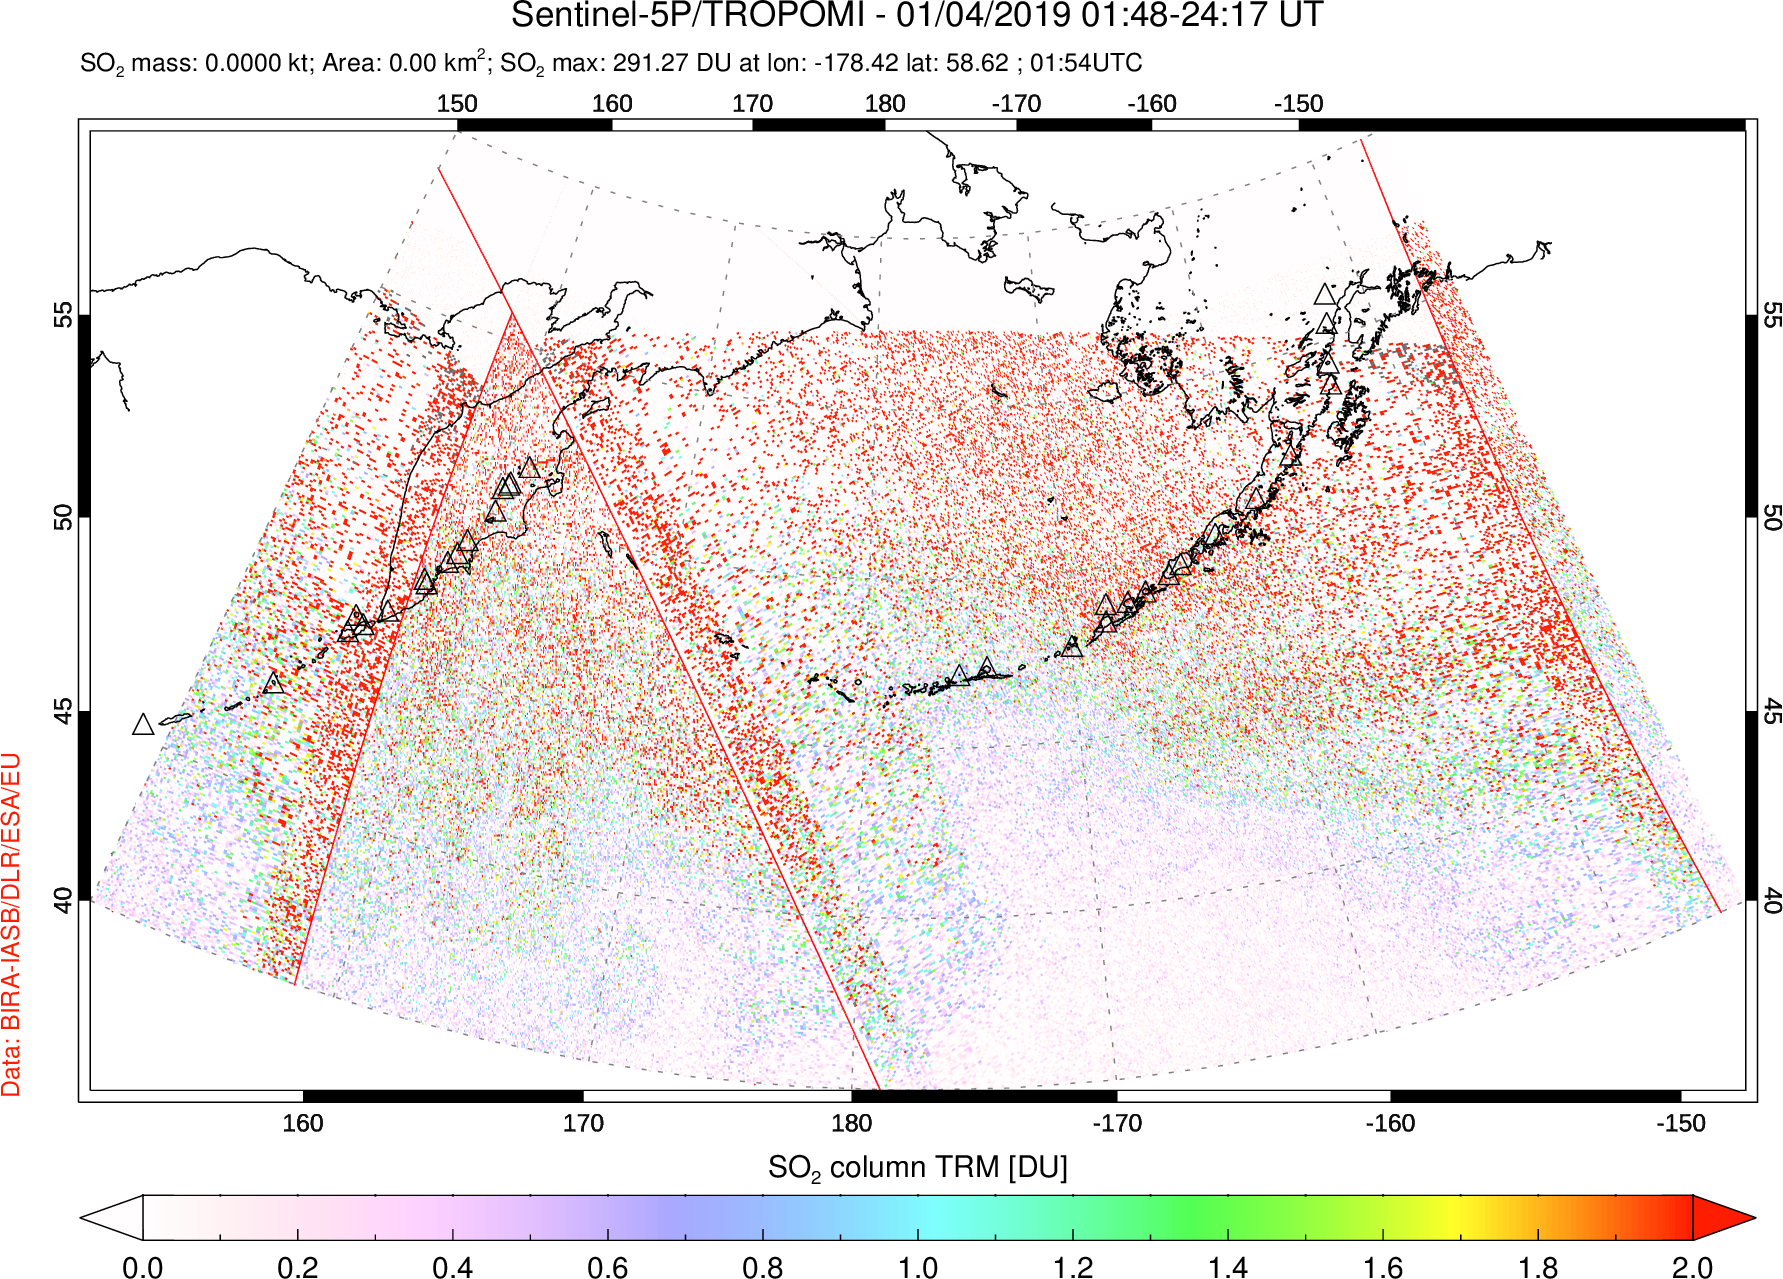 A sulfur dioxide image over North Pacific on Jan 04, 2019.